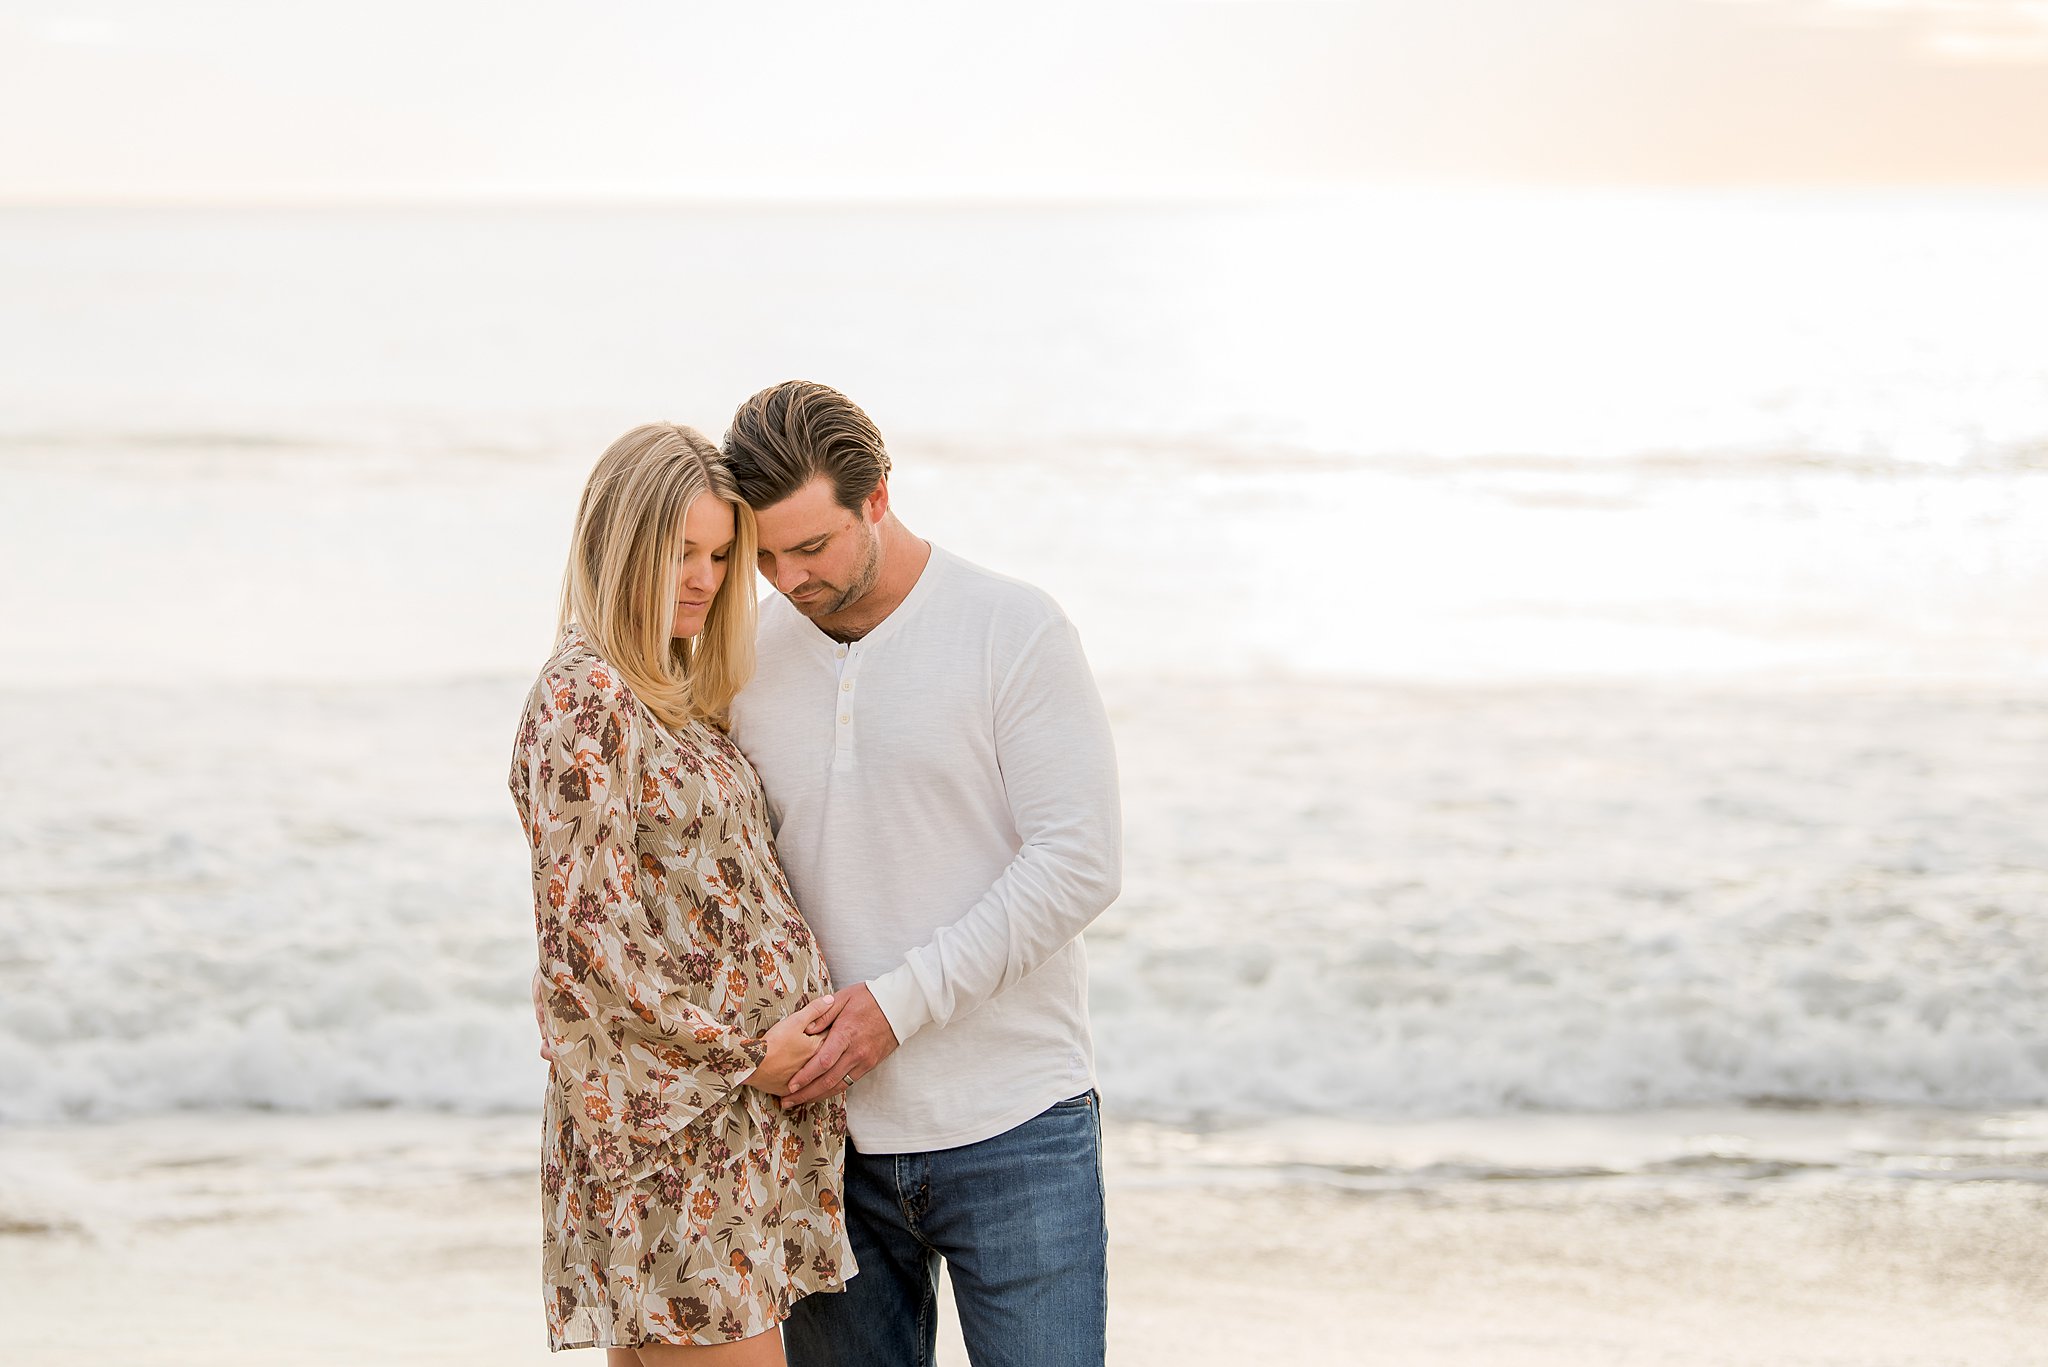 A mother to be leans into her husband as they place their hands on her bump at sunset on the beach